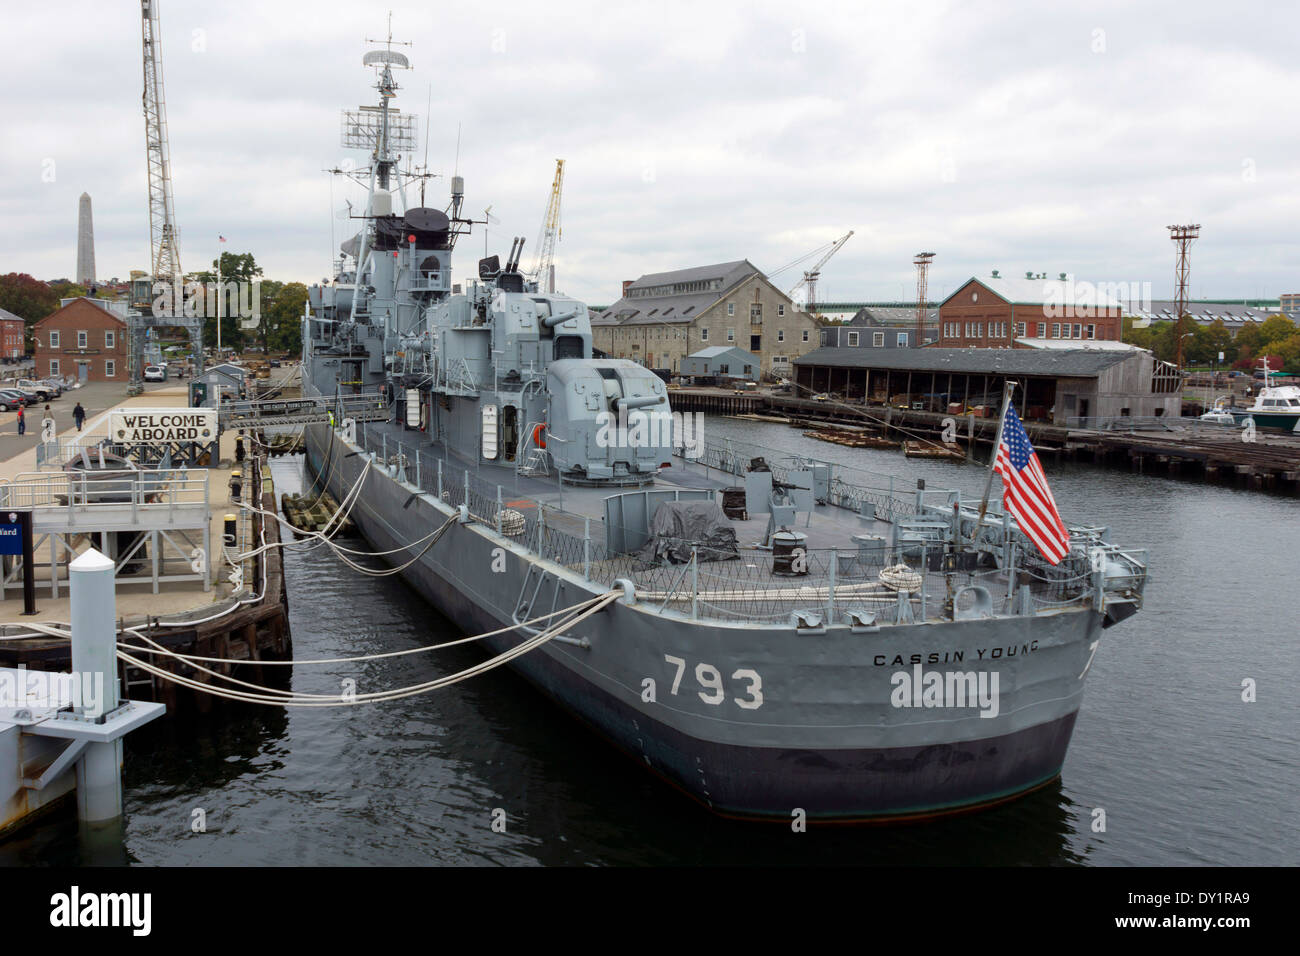 L'USS Cassin Young, Charlestown Navy Yard, Charlestown, Boston, Massachusetts, New England, USA Banque D'Images